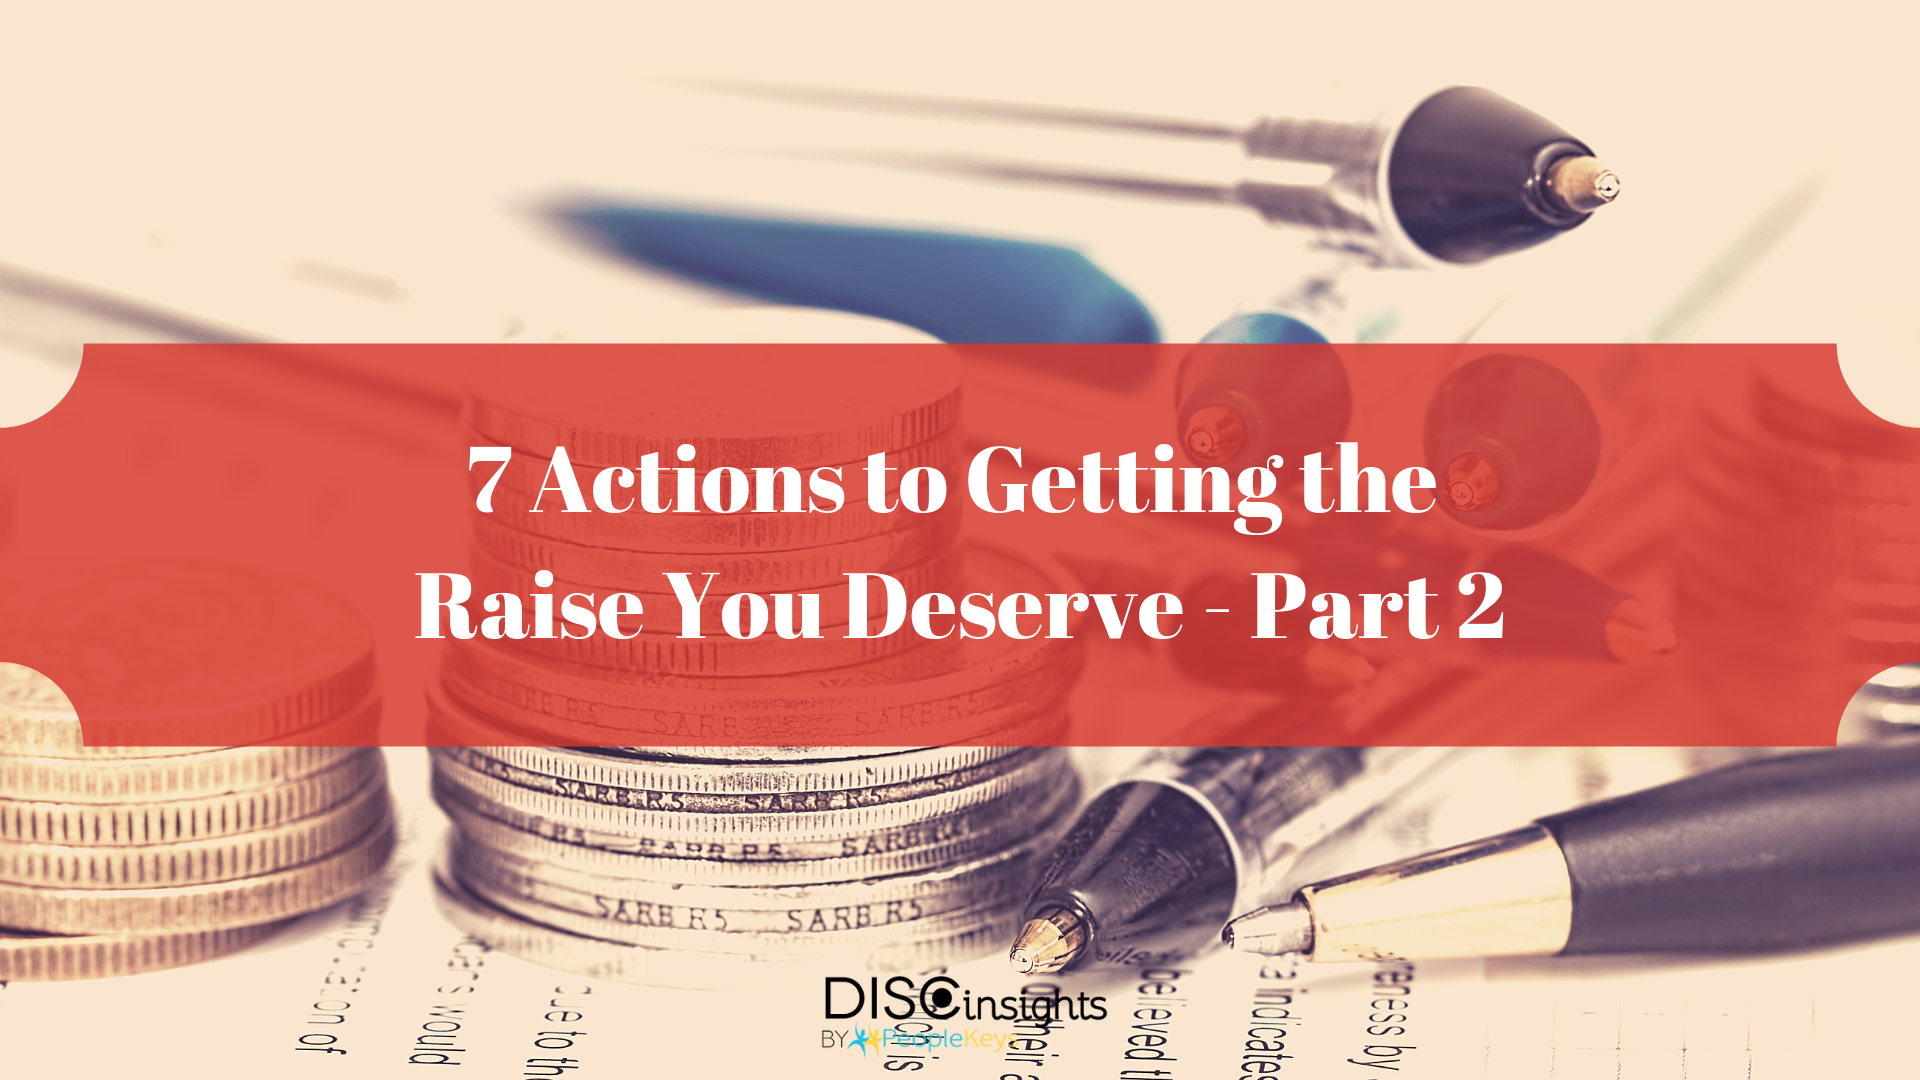 7 Actions to Getting the Raise You Deserve - Part 1 (1)